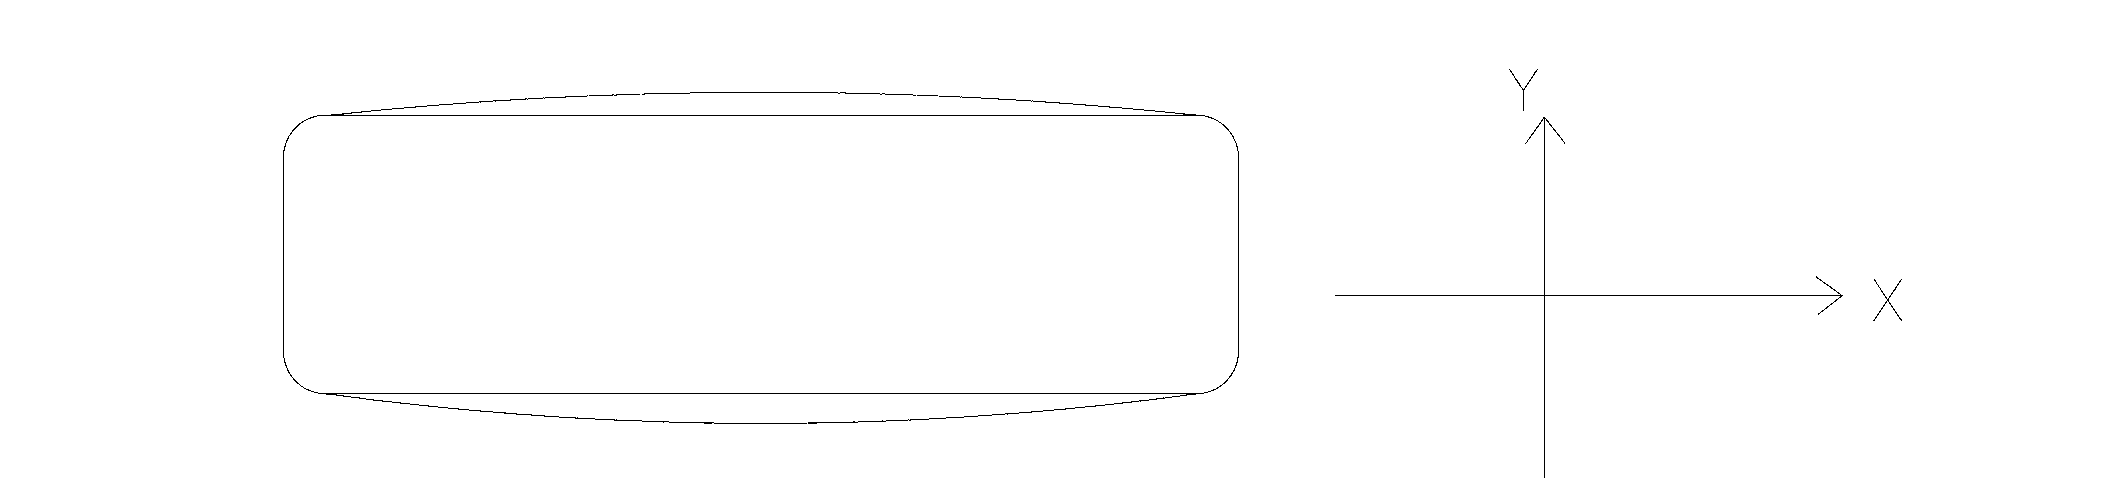 Parking device applicable to side parking spaces